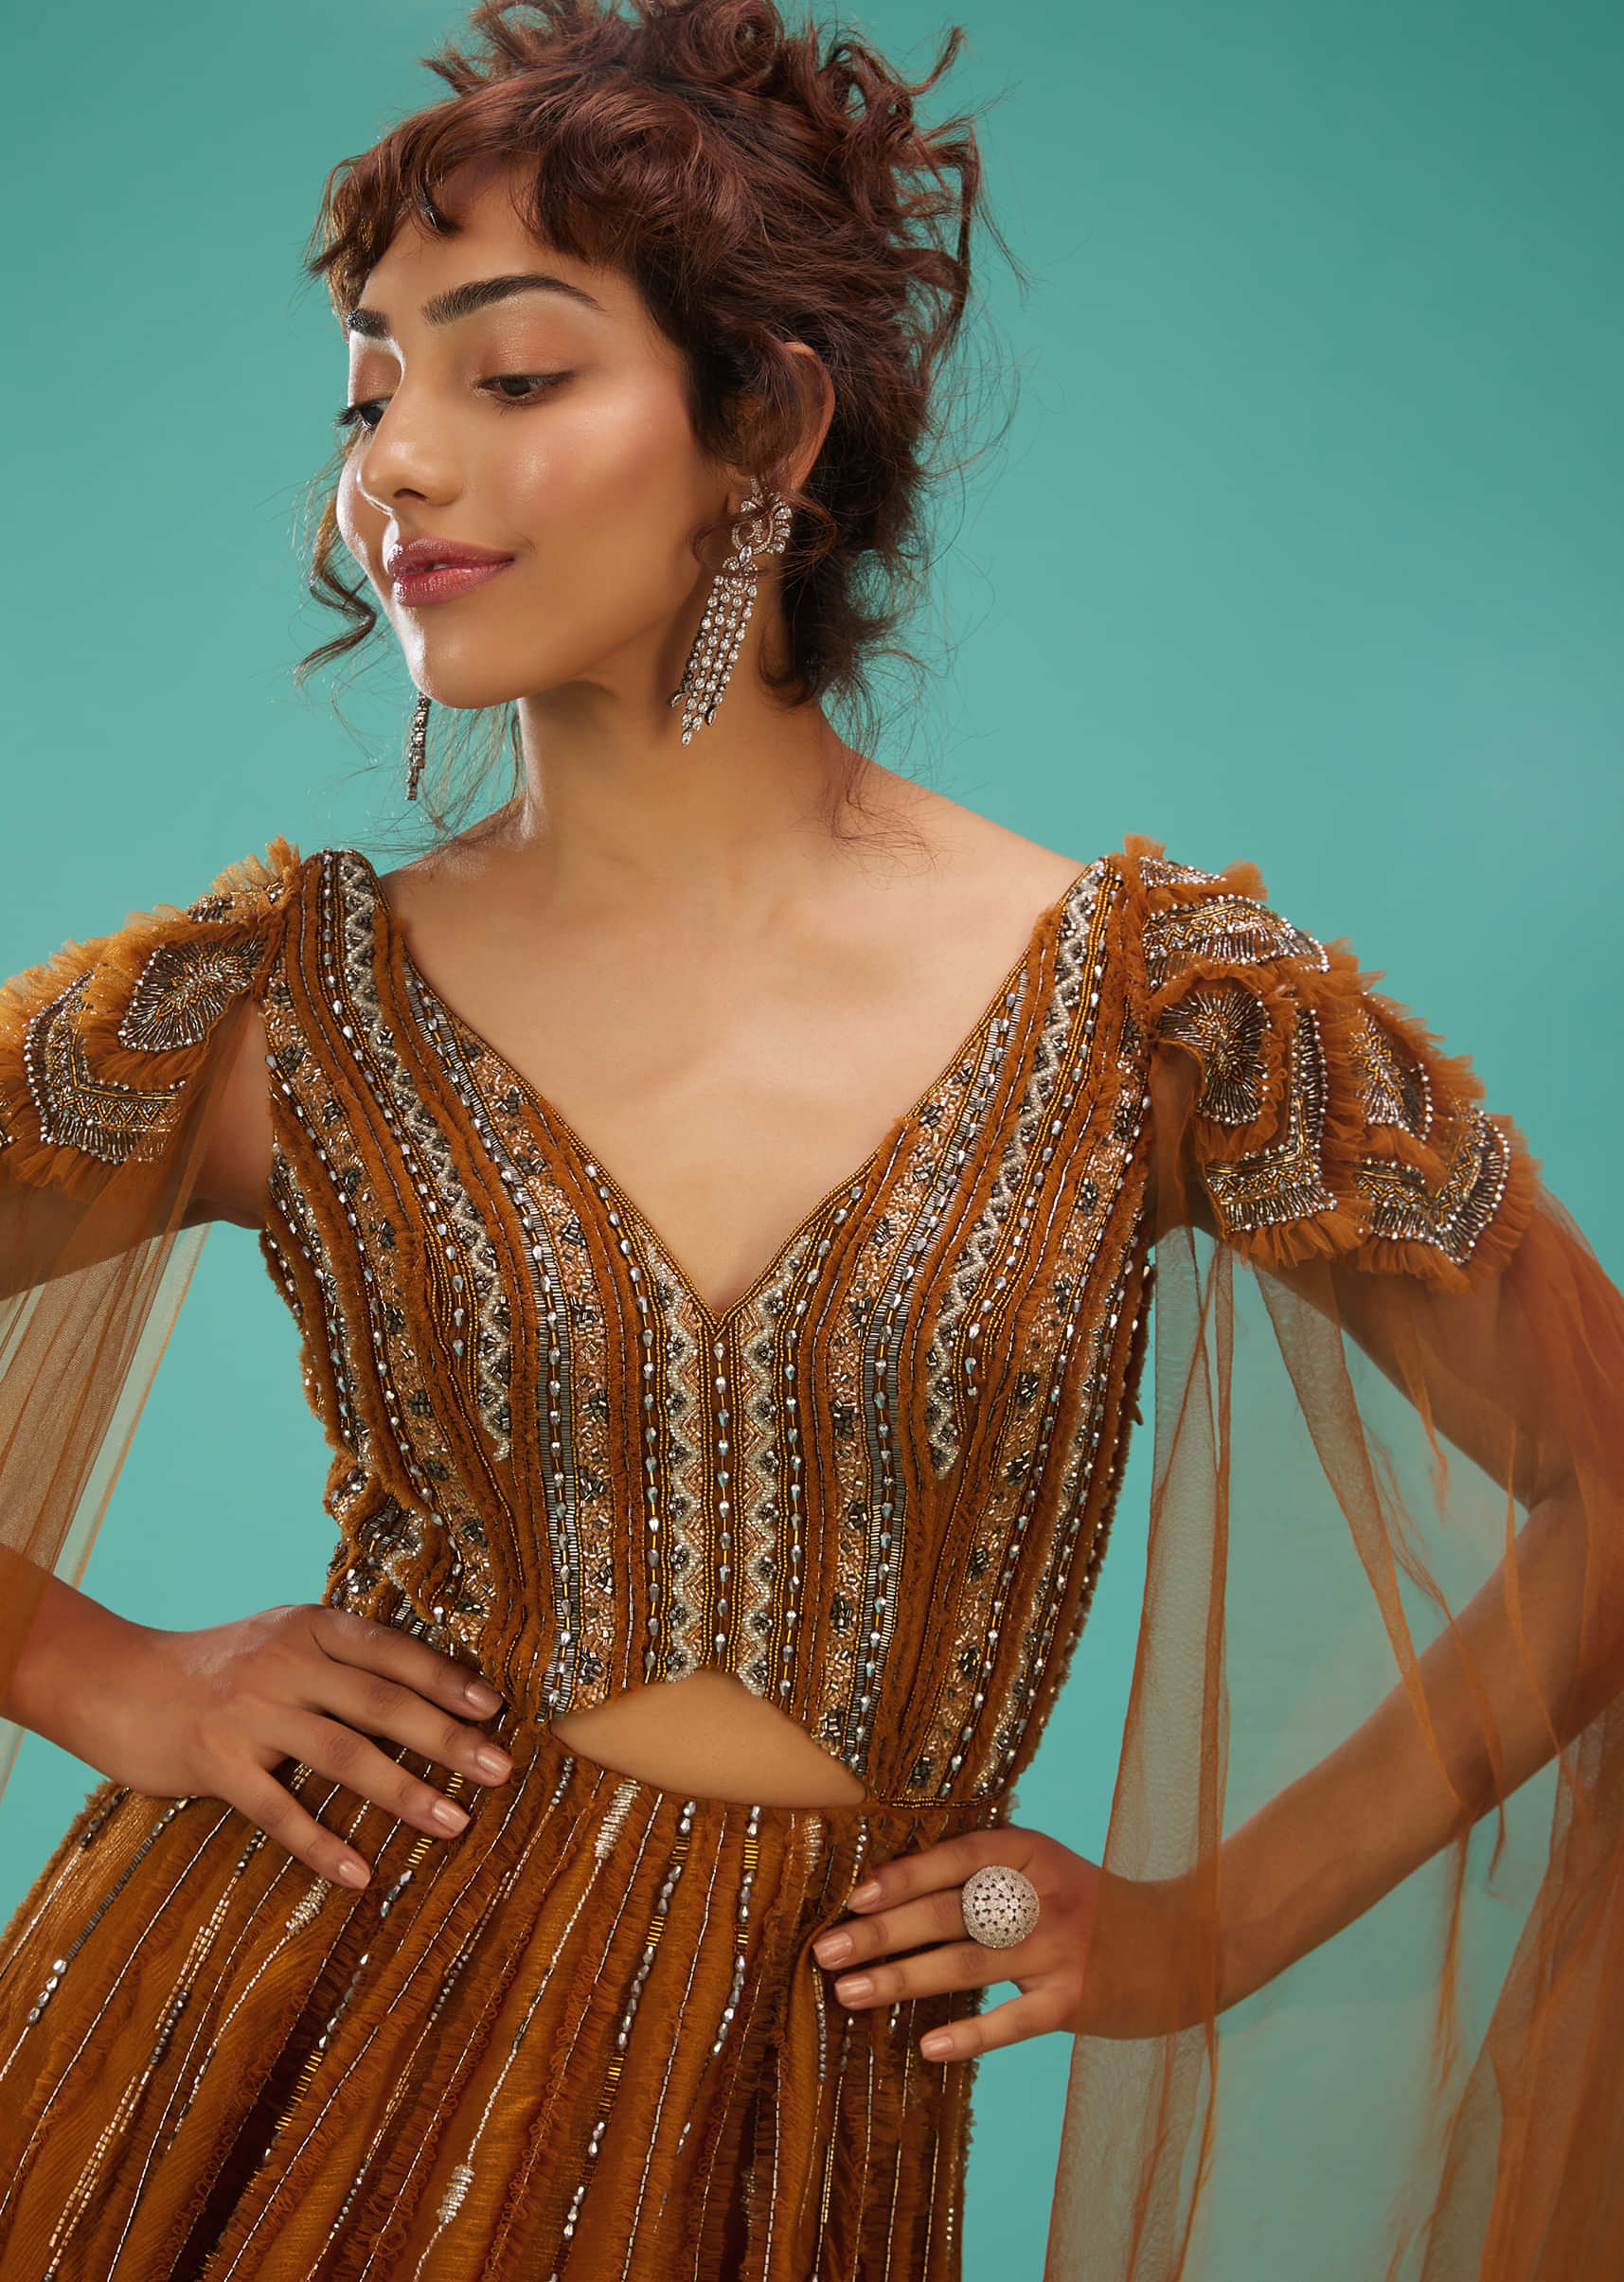 Rust Orange Ball Gown With Ruffle Frills And Embroidery